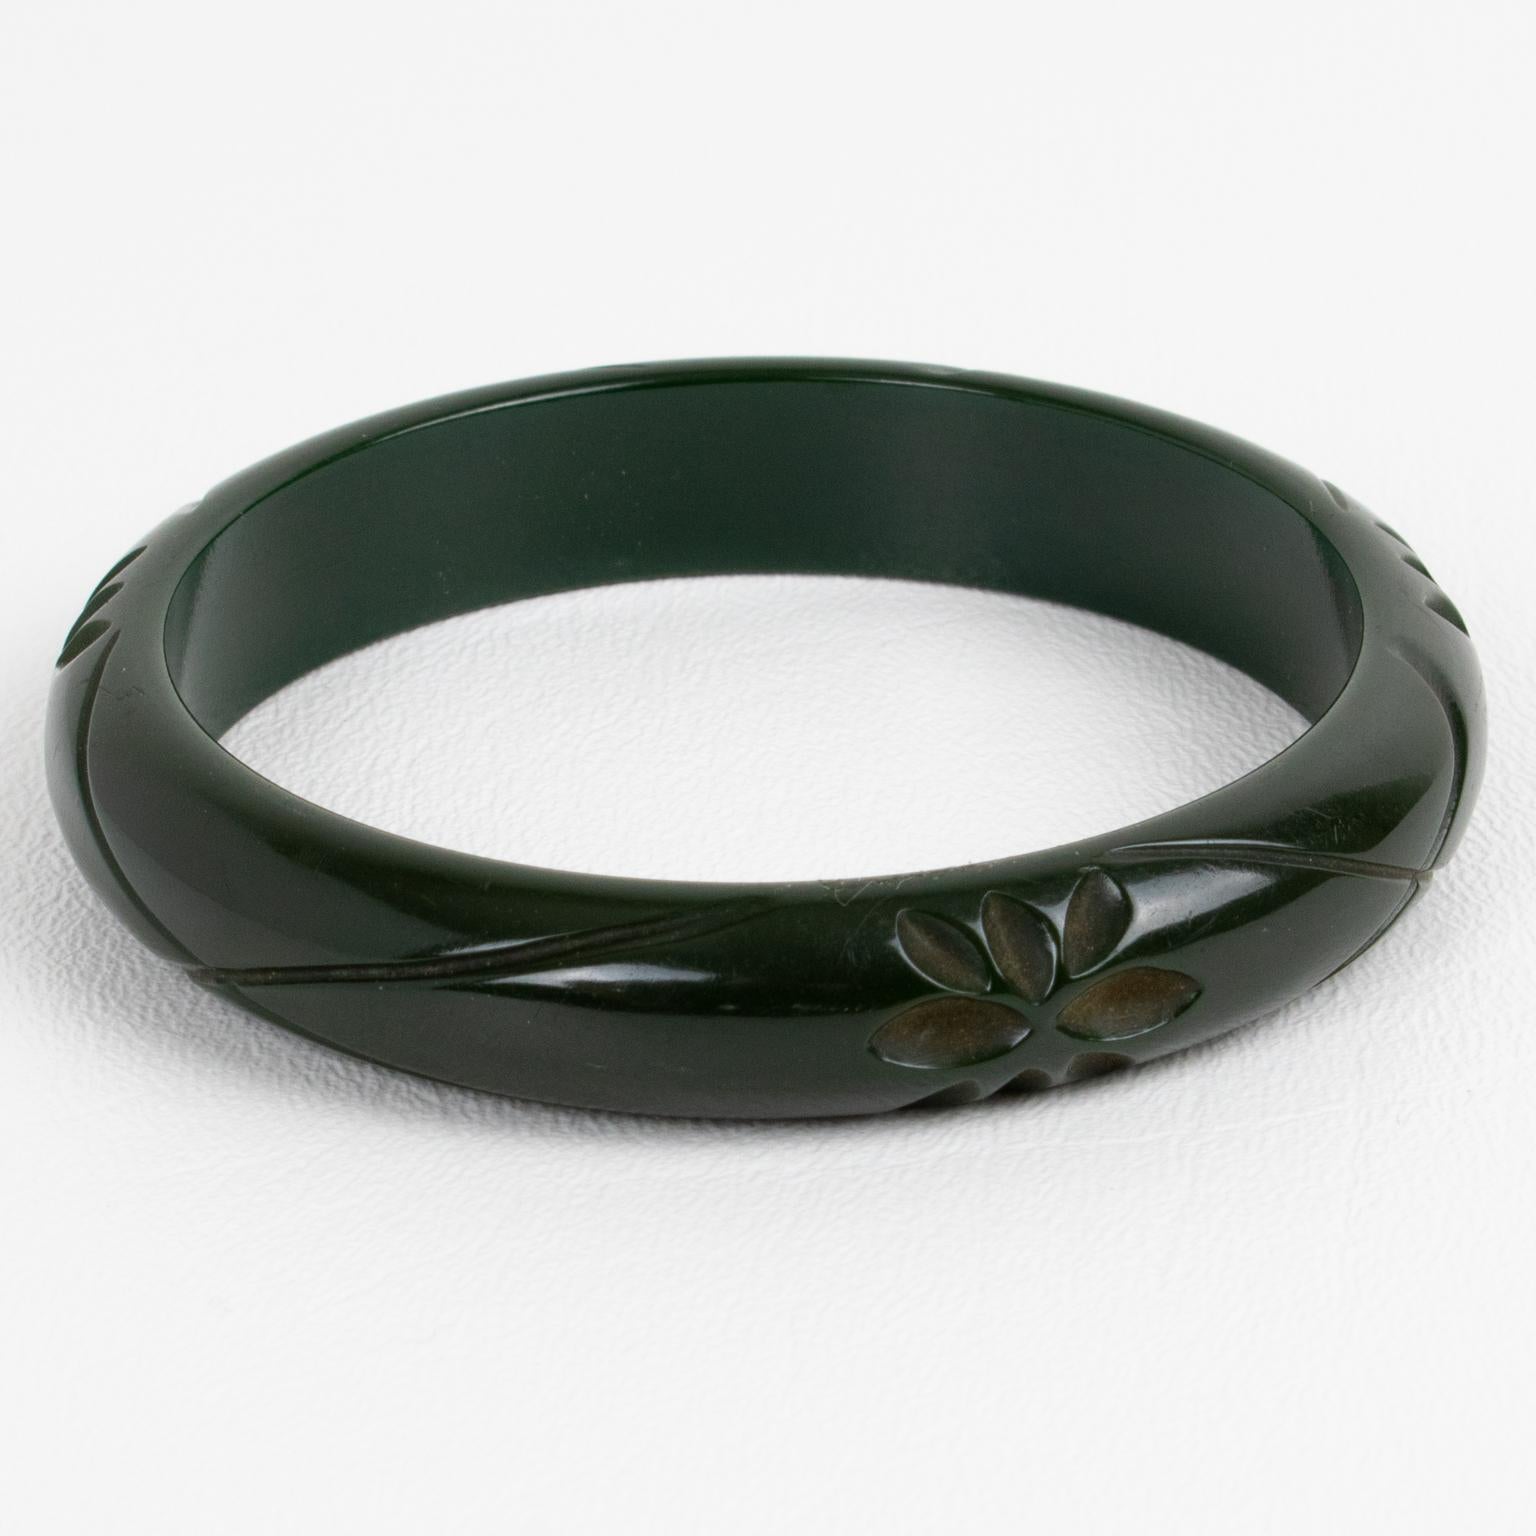 This is an elegant army green Bakelite carved bracelet bangle. It features a spacer domed shape with a deep geometric carving design. The color is an intense dark green plain tone. 
Measurements: Inside across is 2.57 in diameter (6.5 cm) - outside